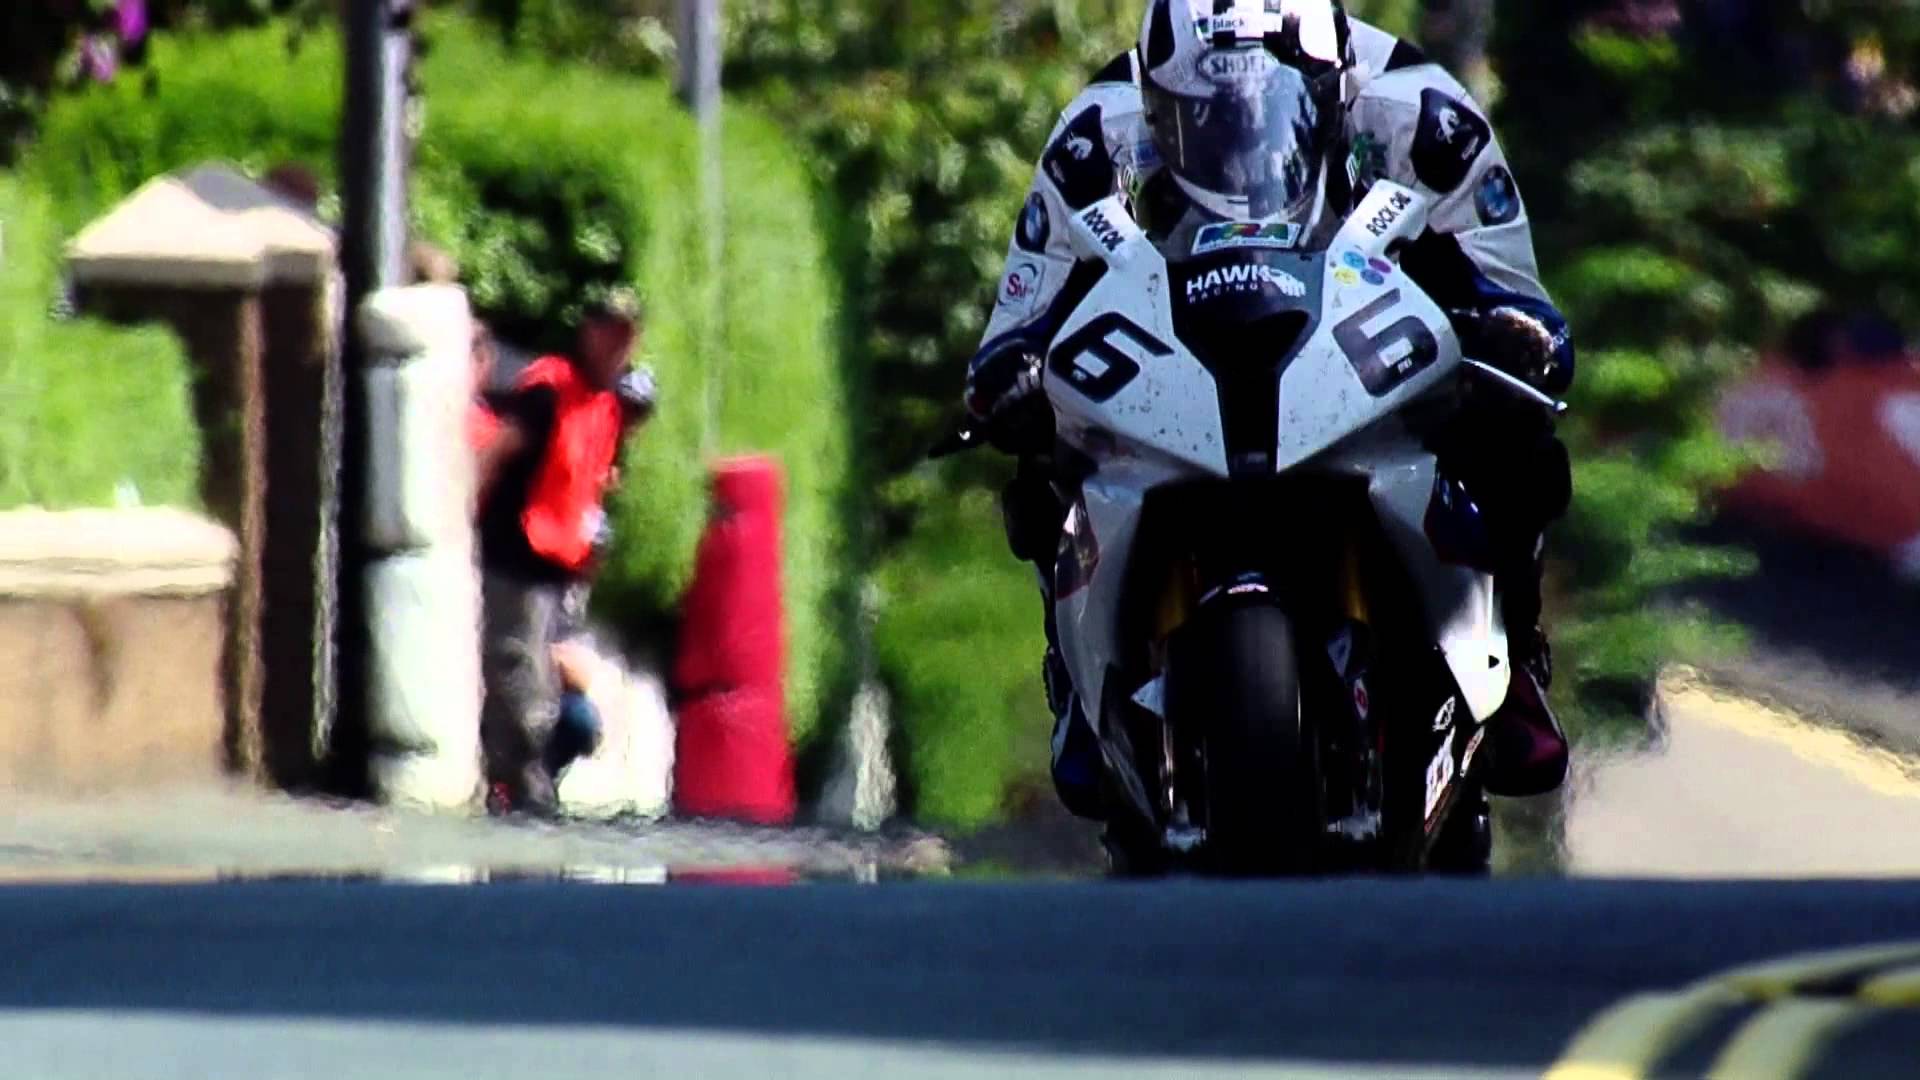 Michael Dunlop Wallpaper And Background Image